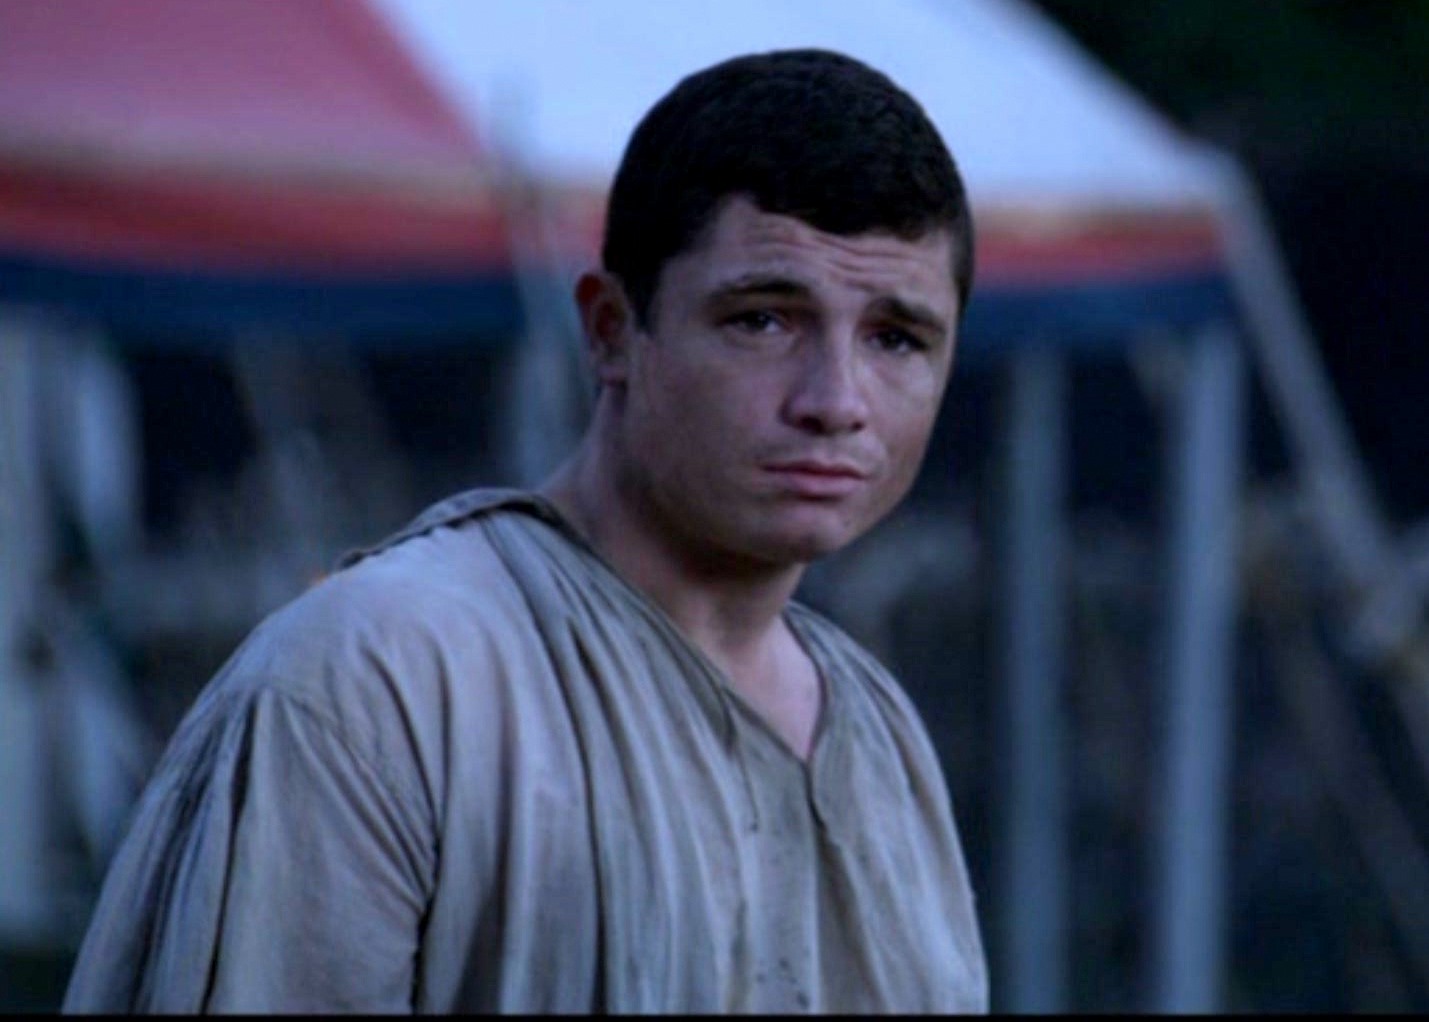 Harry Hurst as played by Jody Latham